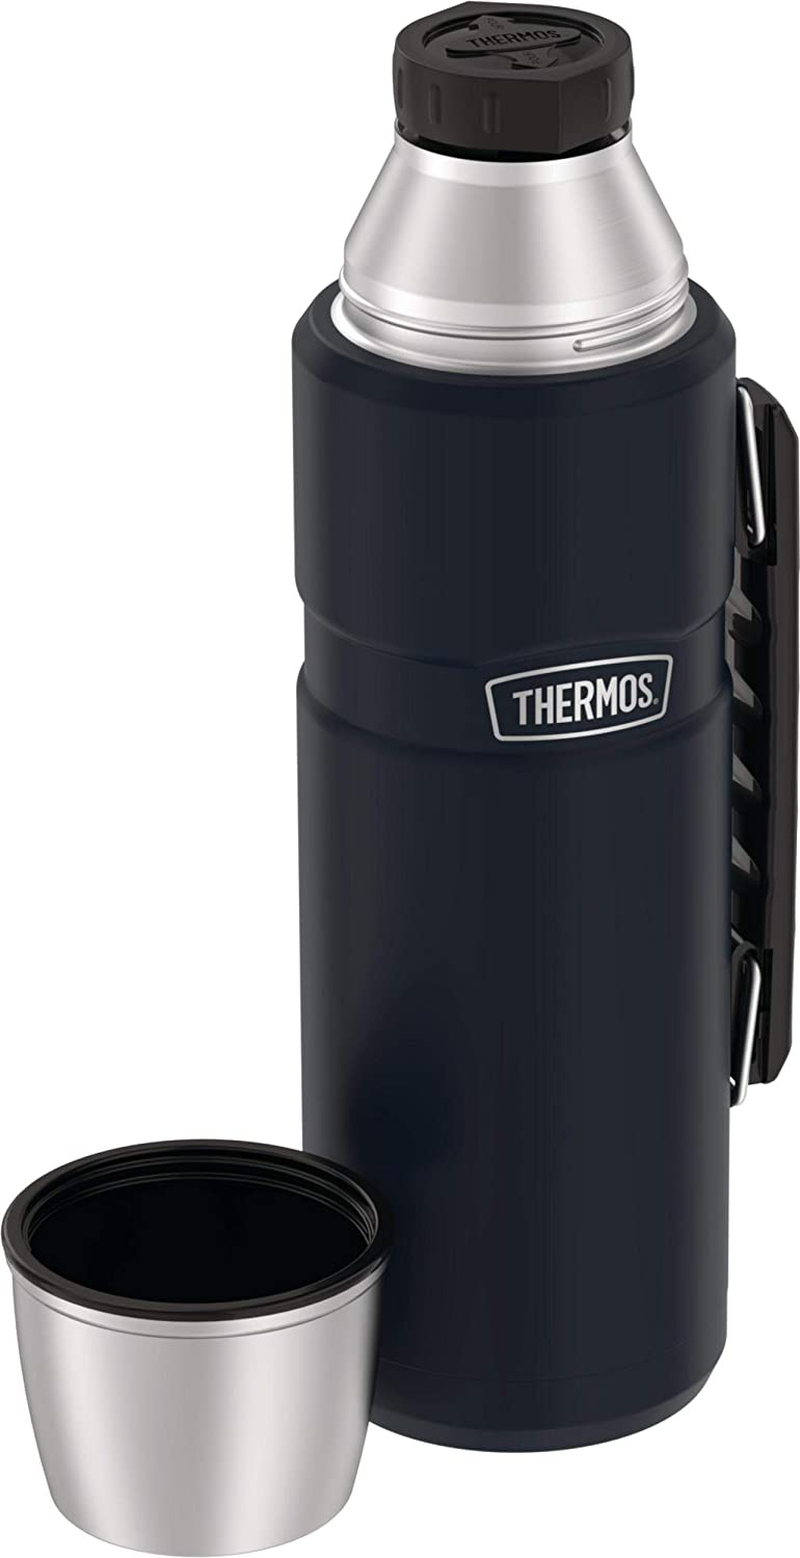 Thermos 1.2L Stainless Steel Vacuum Insulated Flask - Midnight Blue